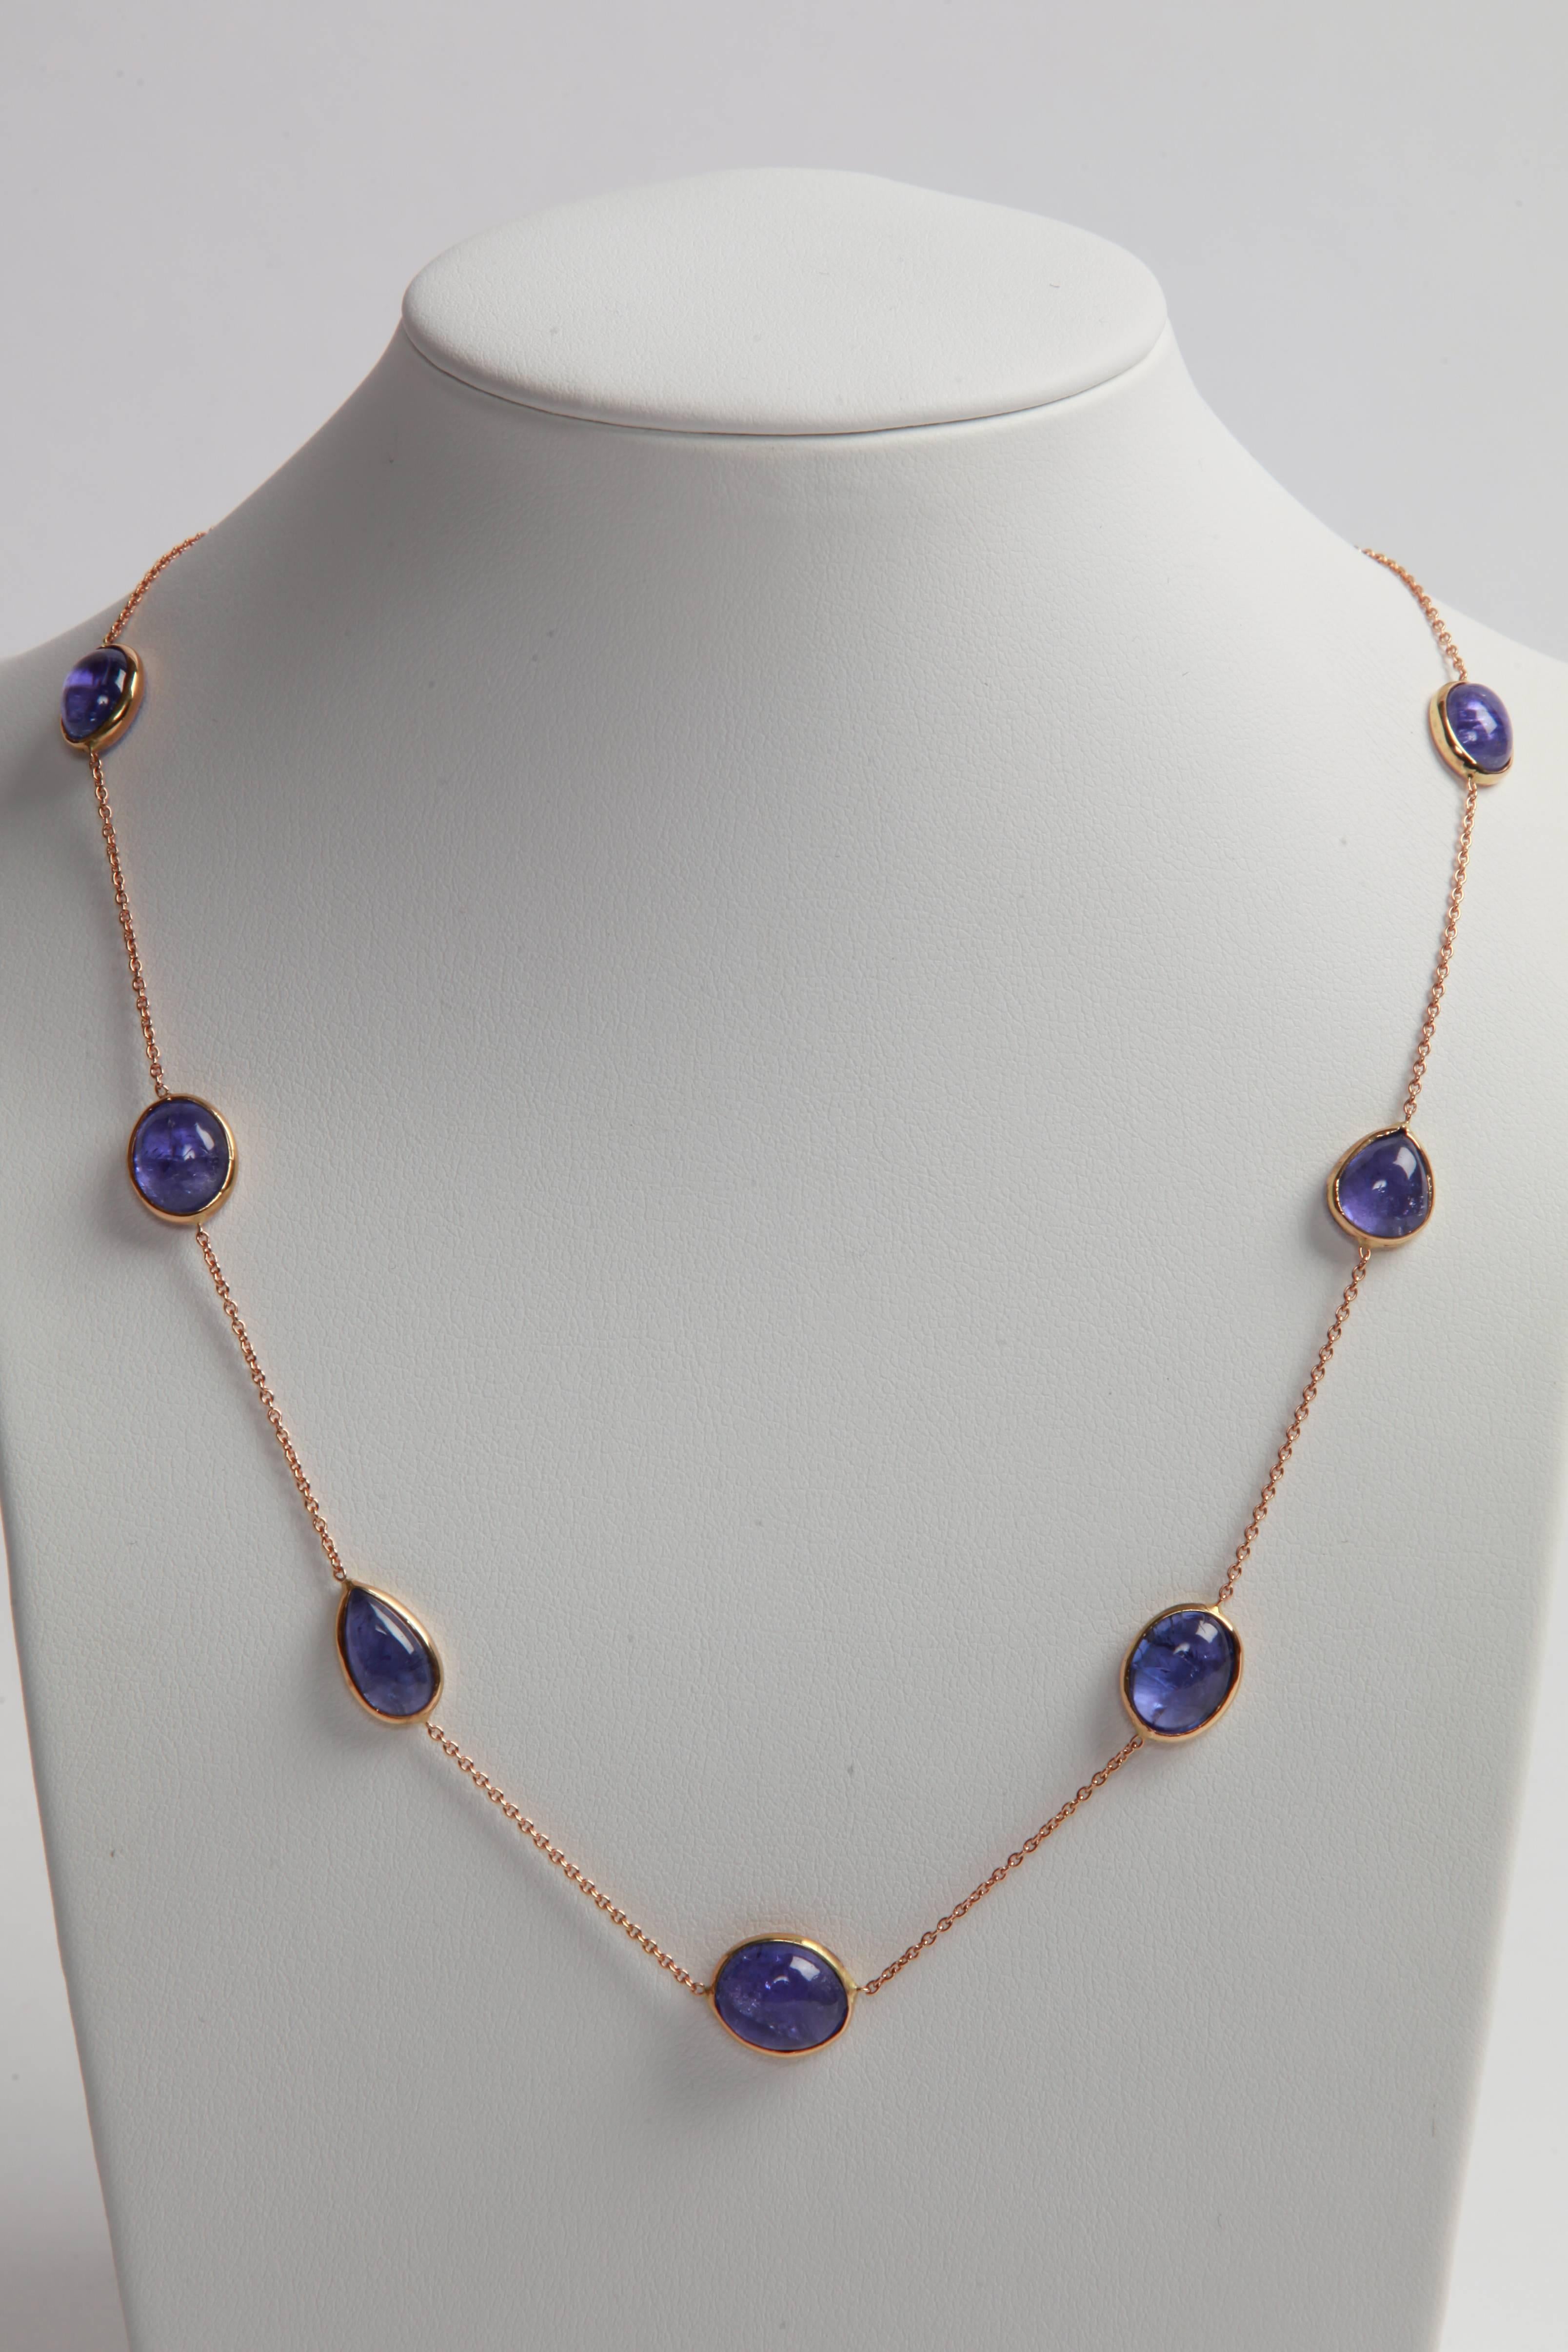 Women's 18 K Yellow Gold Necklaces with Tourmalines and Tanzanite Cabochons